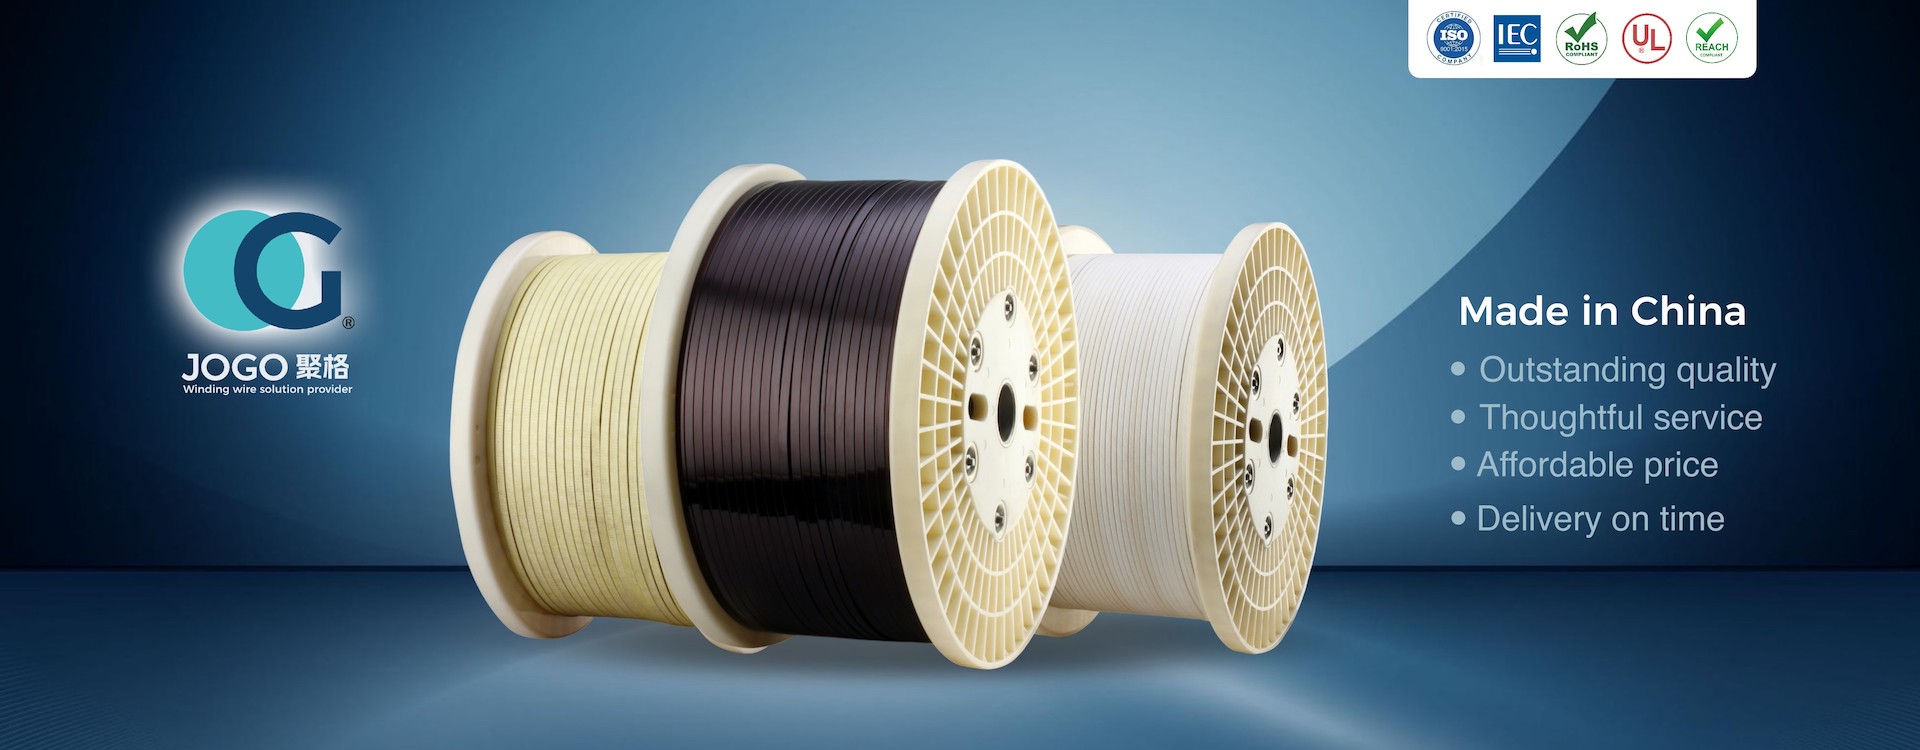 JOGO Group China | High Quality Winding Wire